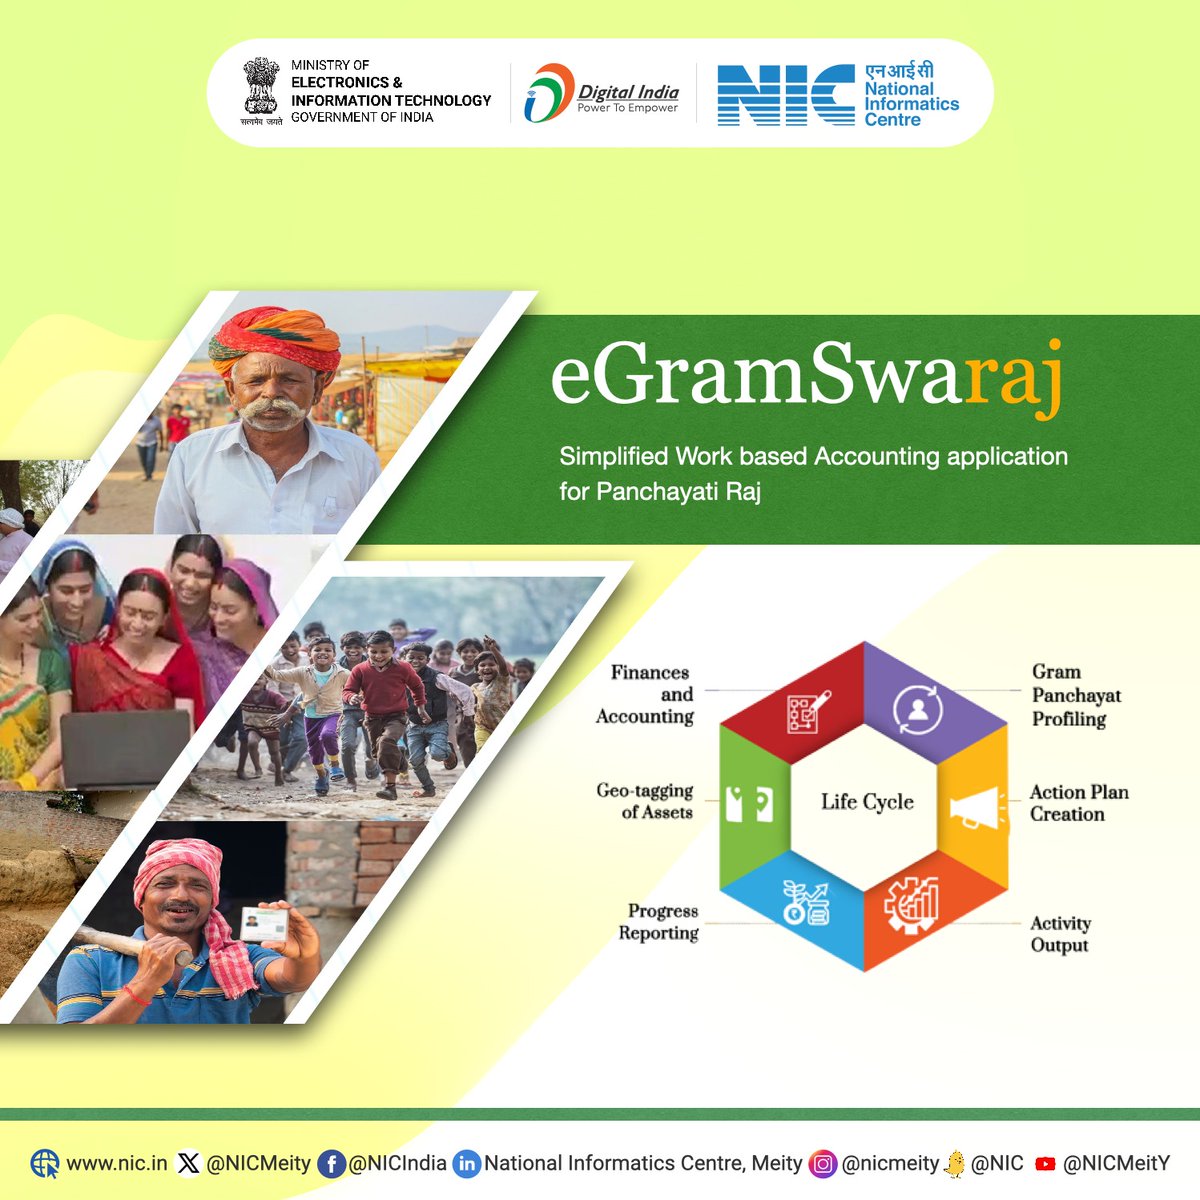 #eGramswaraj is an all-in-one digital accounting platform for Panchayat operations.This work-oriented accounting application has been developed by @NICMeity for driving the #DigitalTransformation of India's rural landscape within the Panchayati Raj system. egramswaraj.gov.in